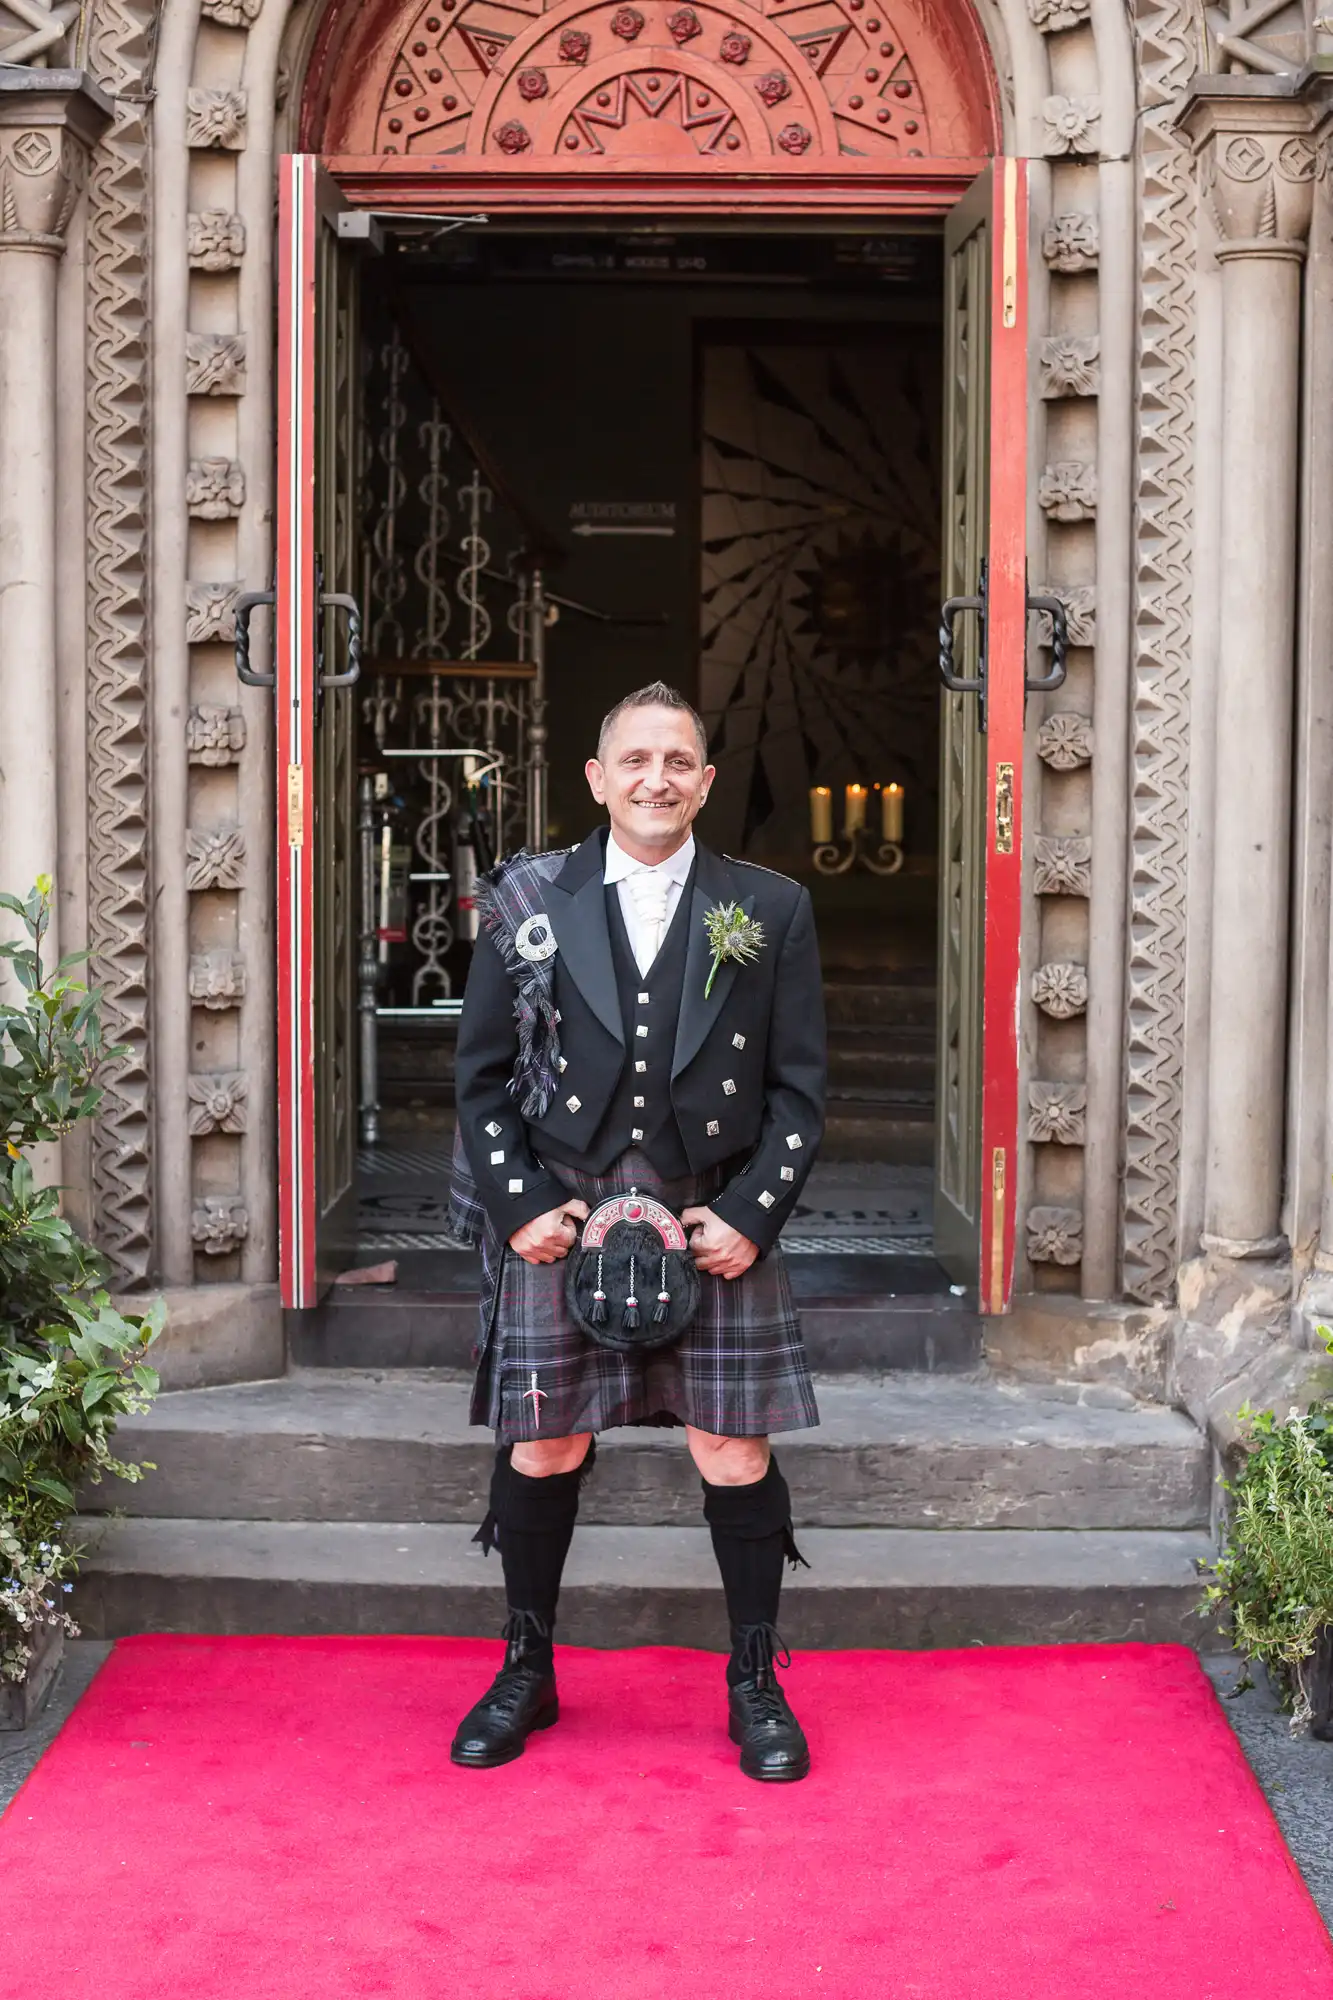 A smiling man in traditional scottish attire, including a kilt and sporran, stands on a red carpet at an ornate doorway.